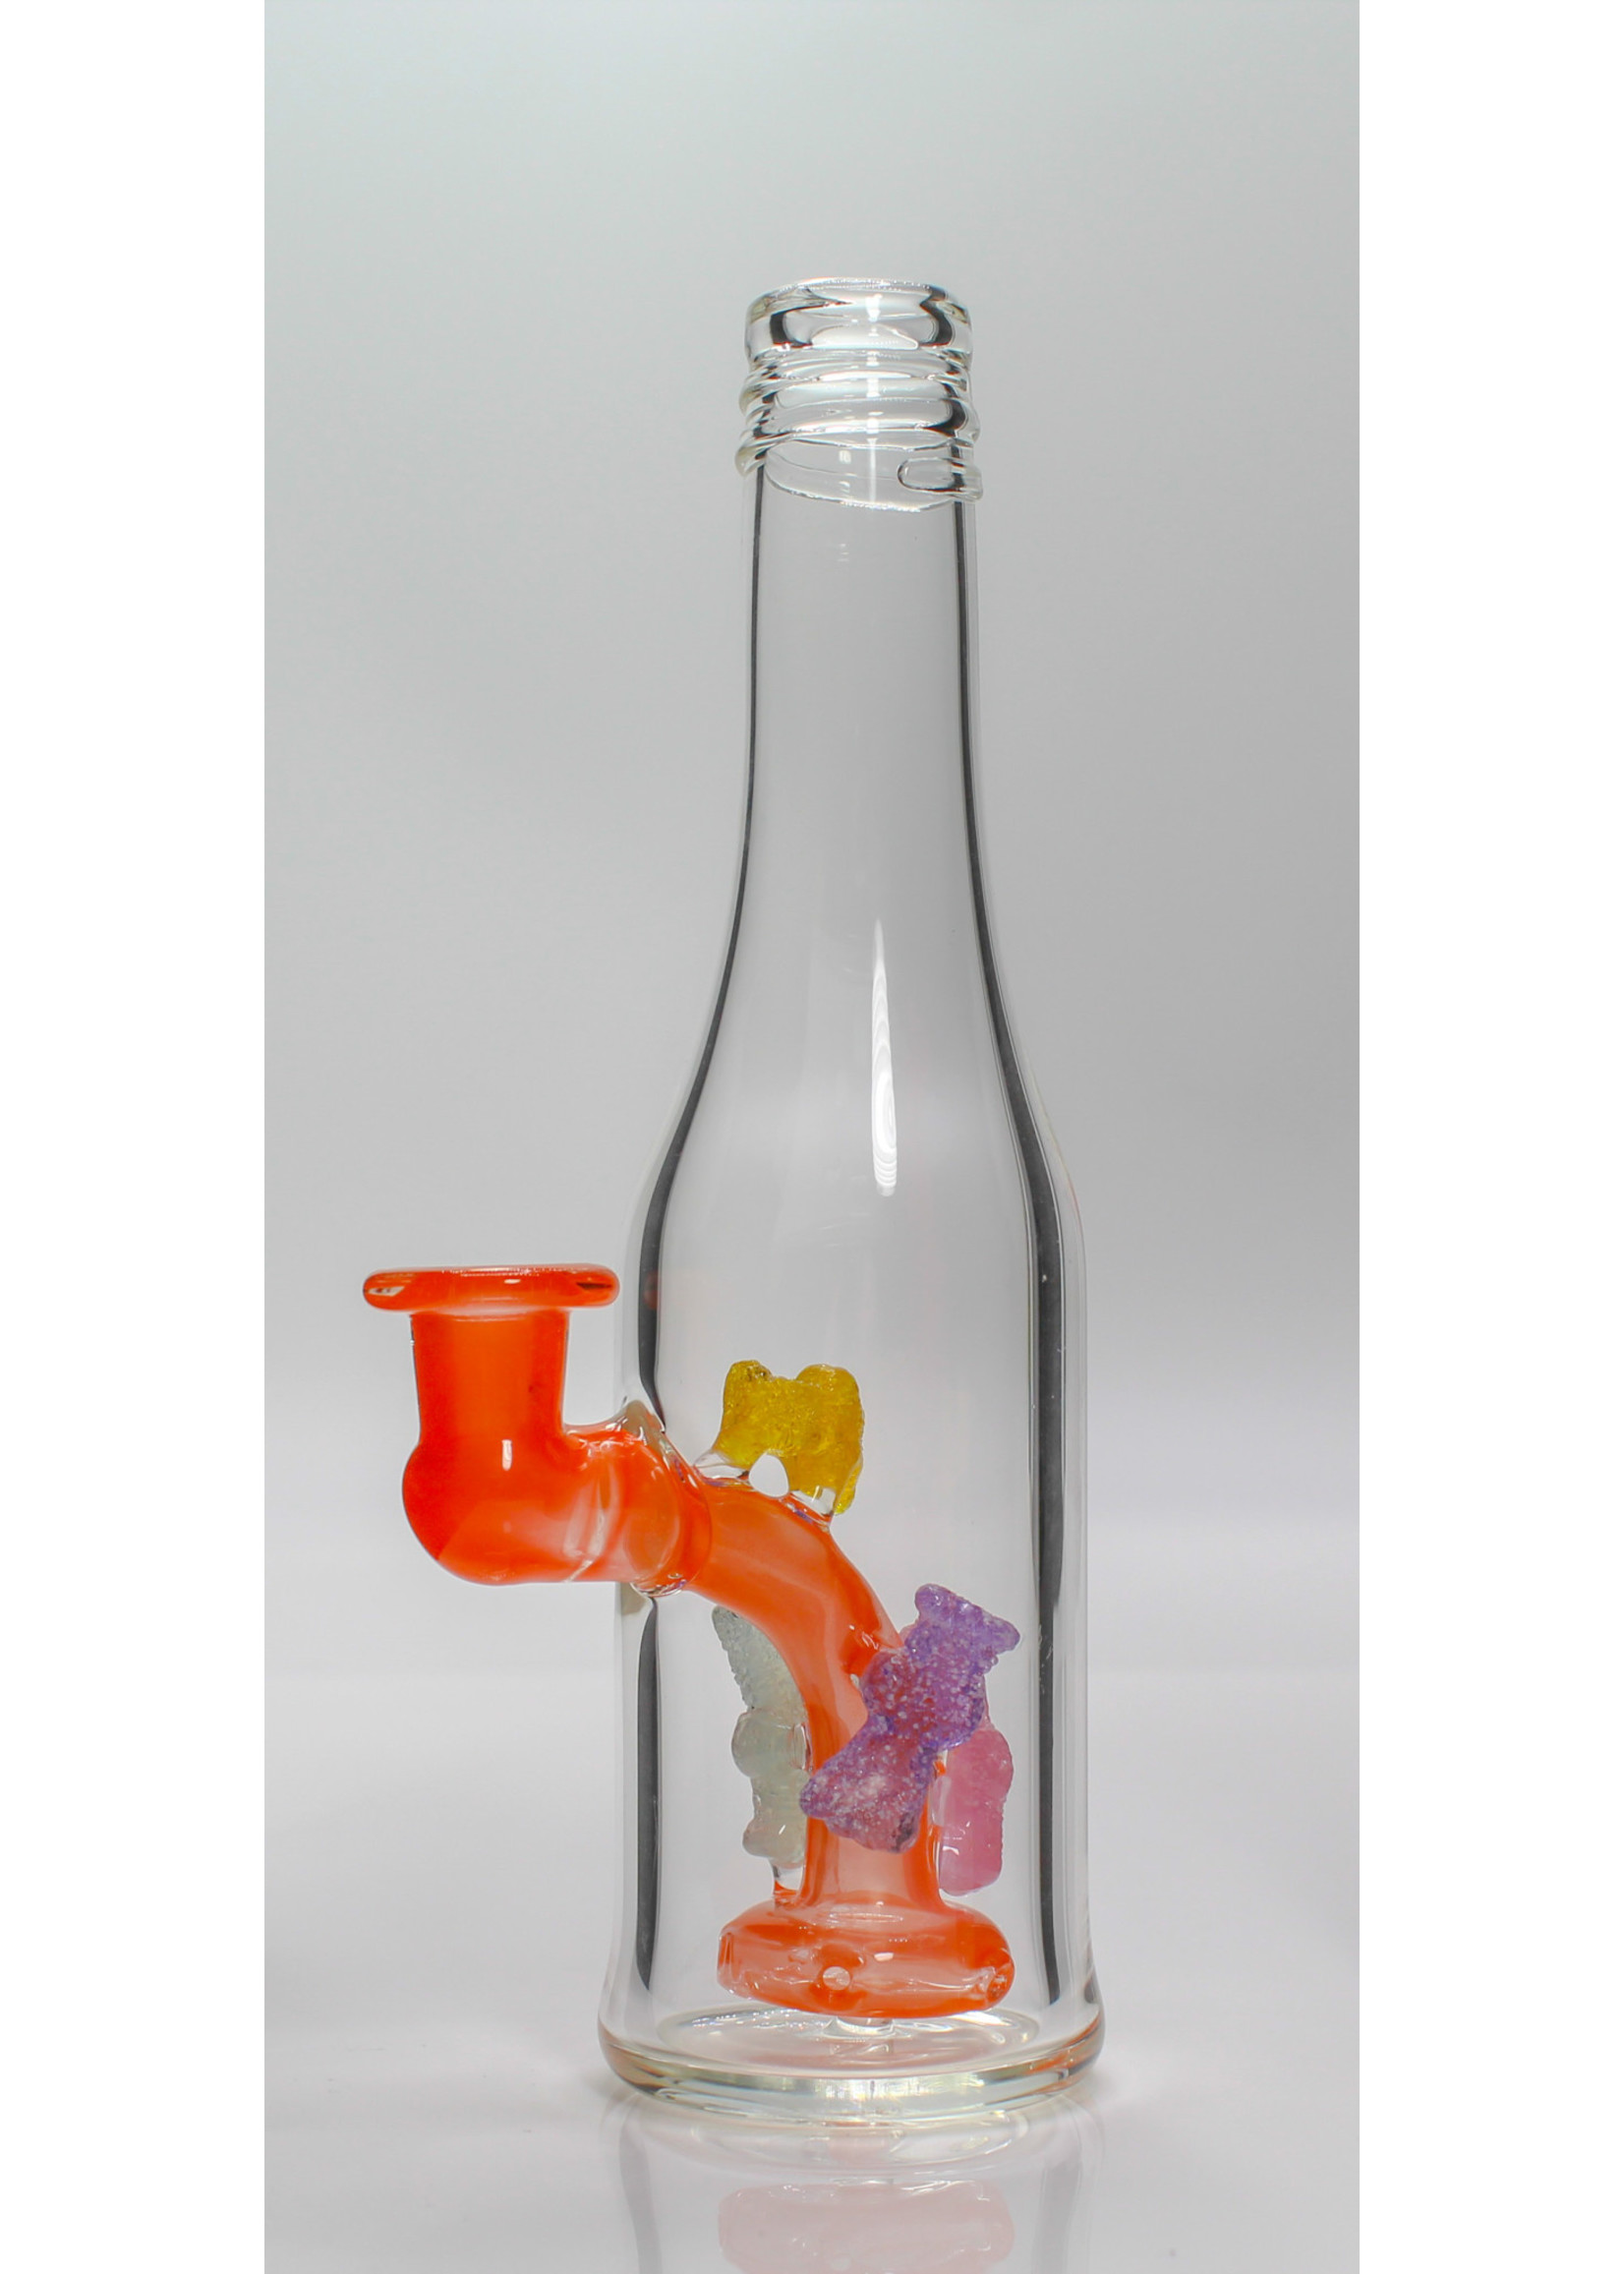 Emperial Glass Emperial Glass Bottle Rig #2